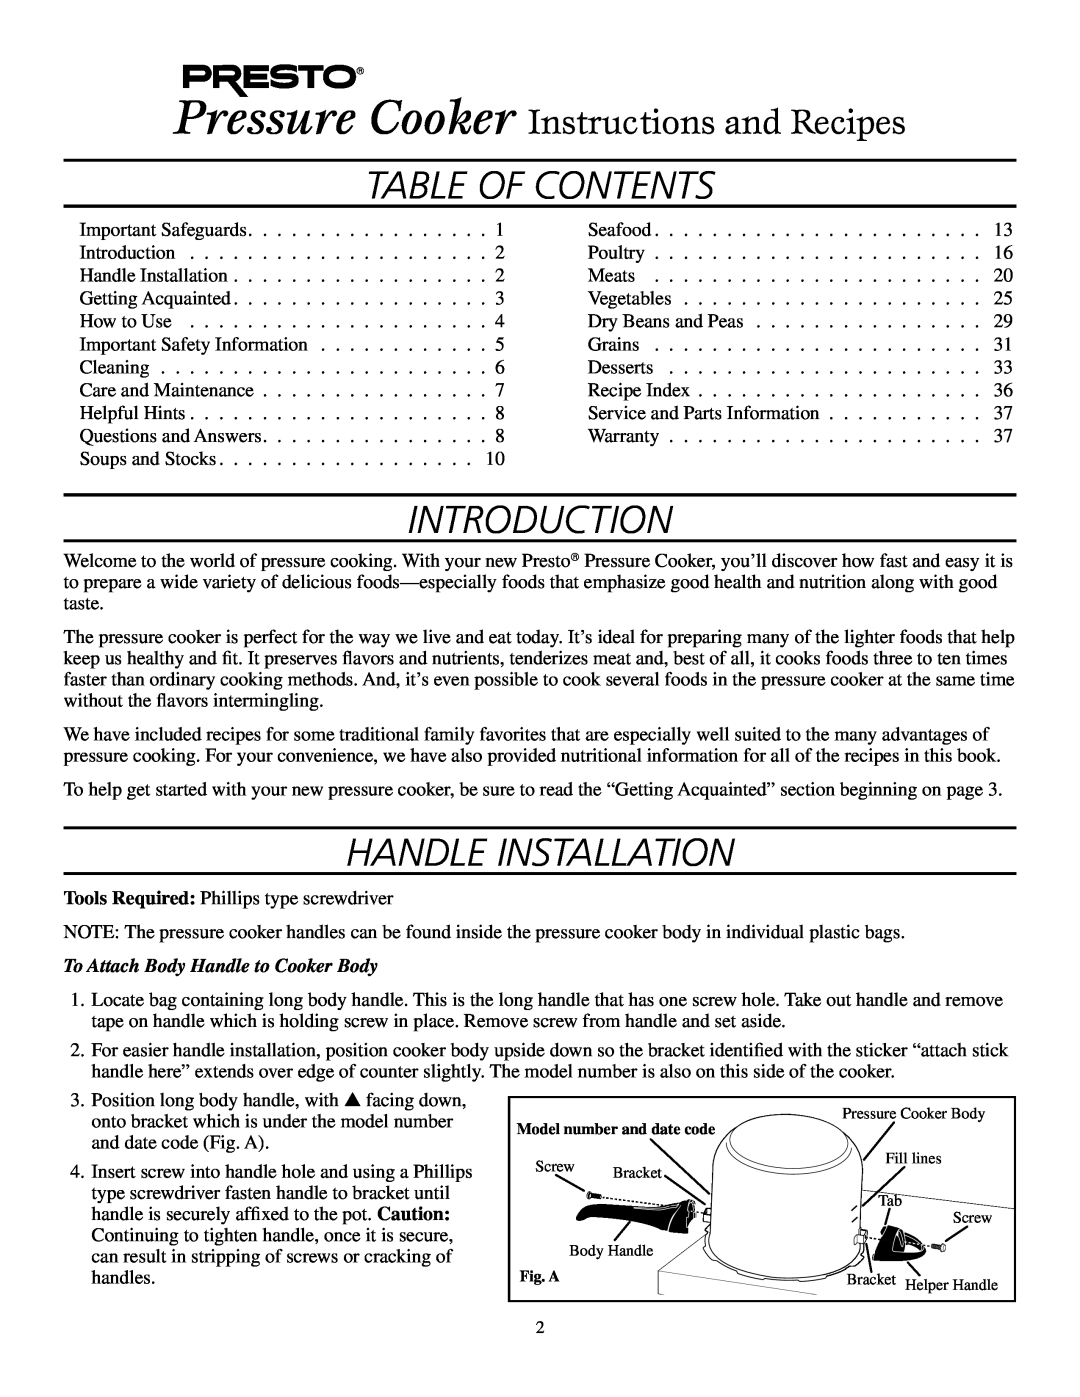 Presto Electric Pressure Cooker manual Table of Contents, Introduction, handle Installation 